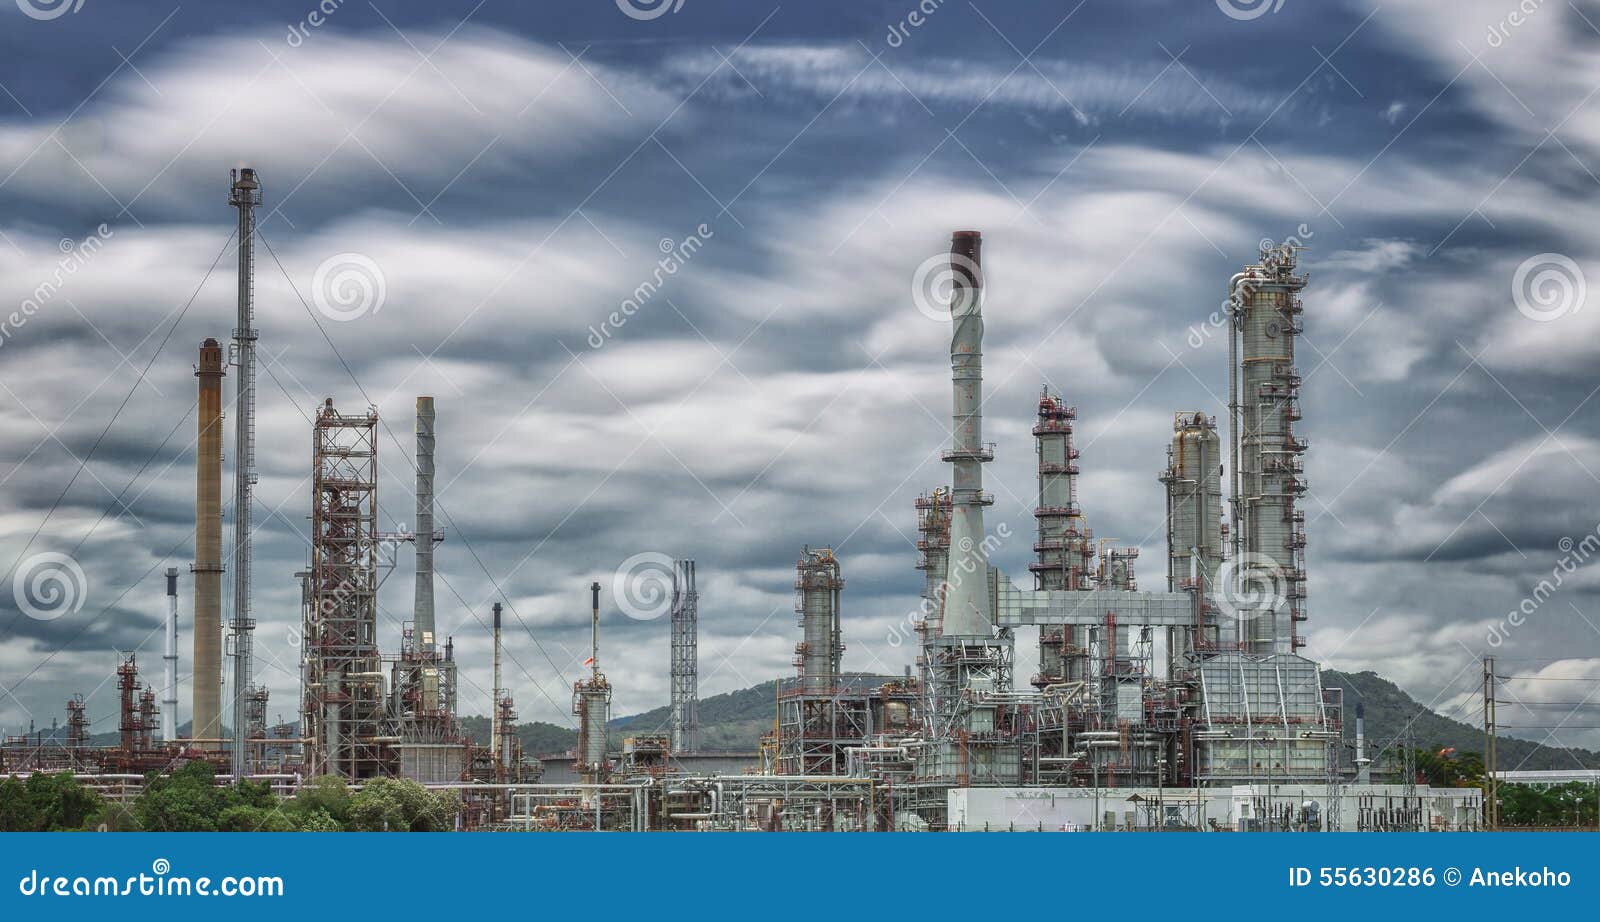 The Environmental Effect Of A Gas Refinery